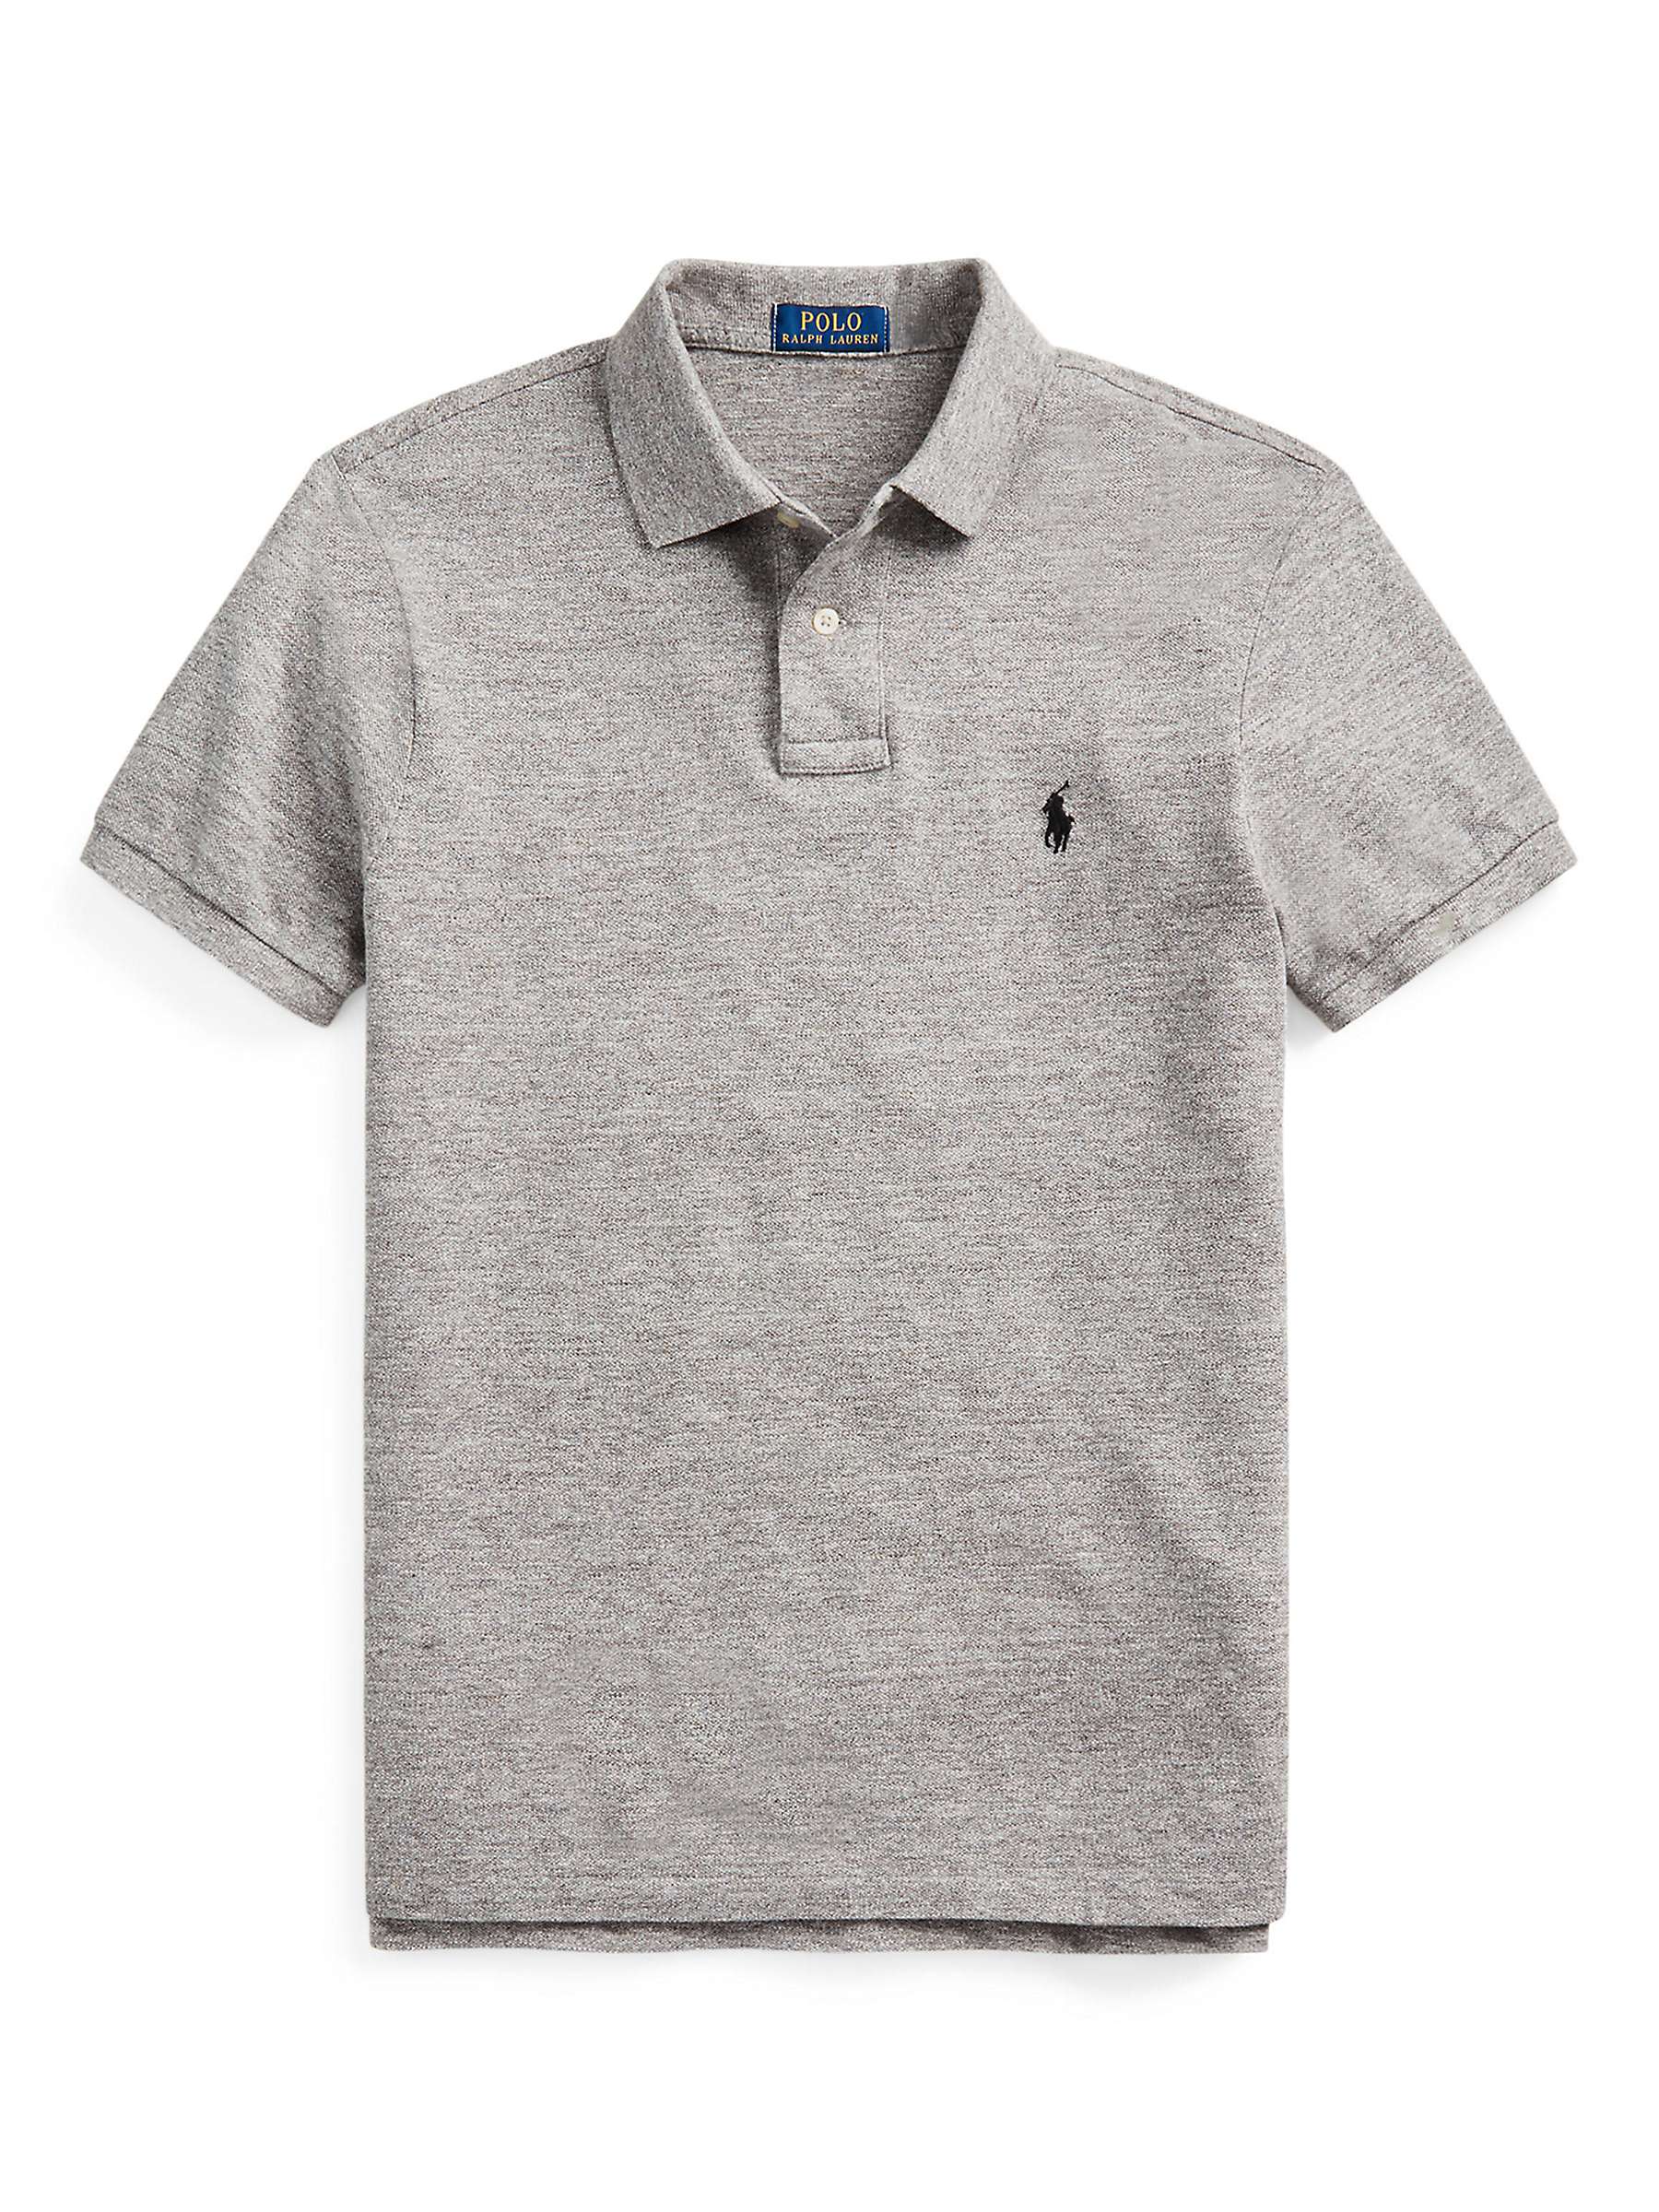 Buy Polo Ralph Lauren Slim Fit Polo Top, Canterbury Heather Online at johnlewis.com